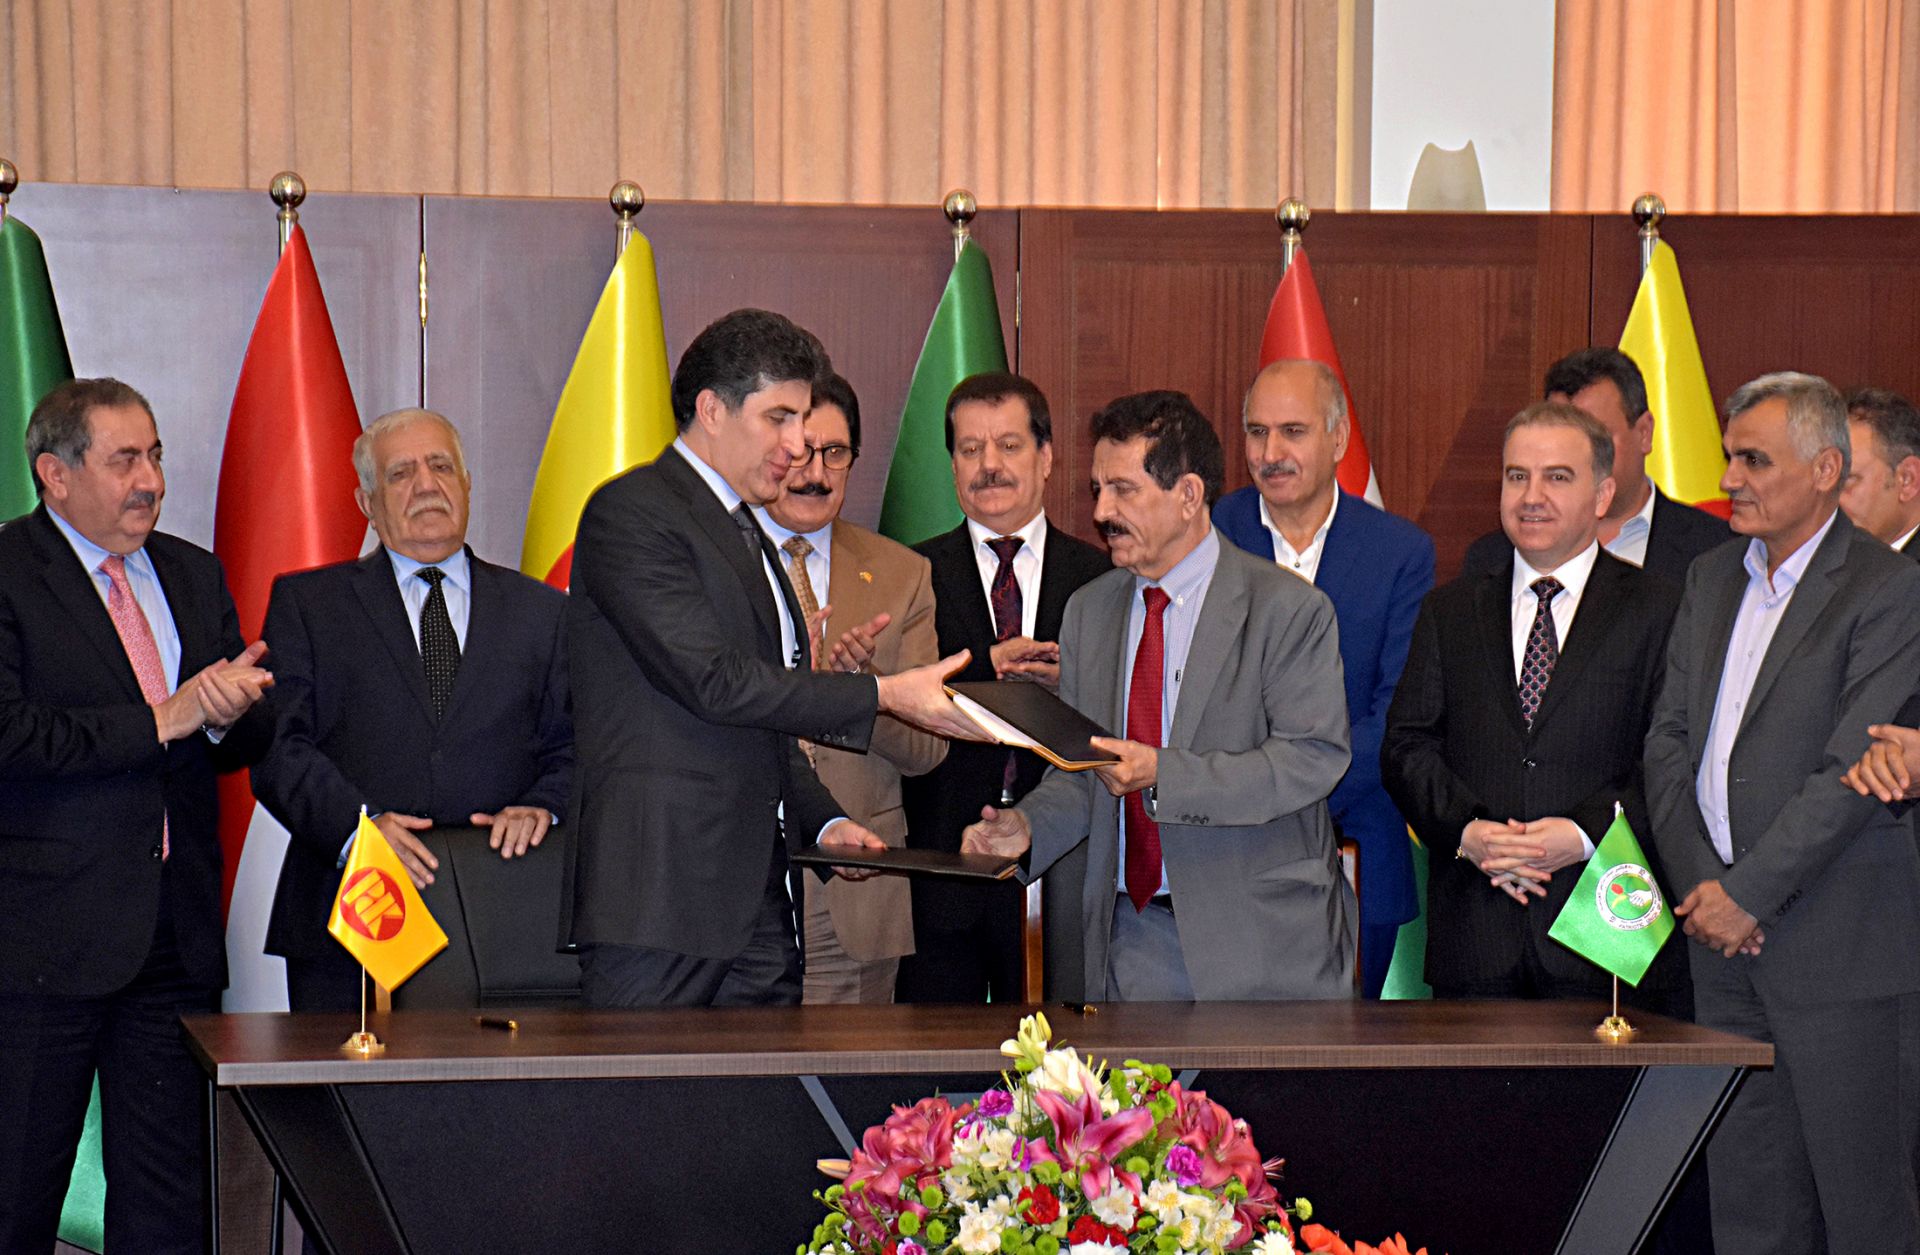 Kurdish officials attend a signing ceremony in Suleimaniyah, Iraq, on May 5, 2019.